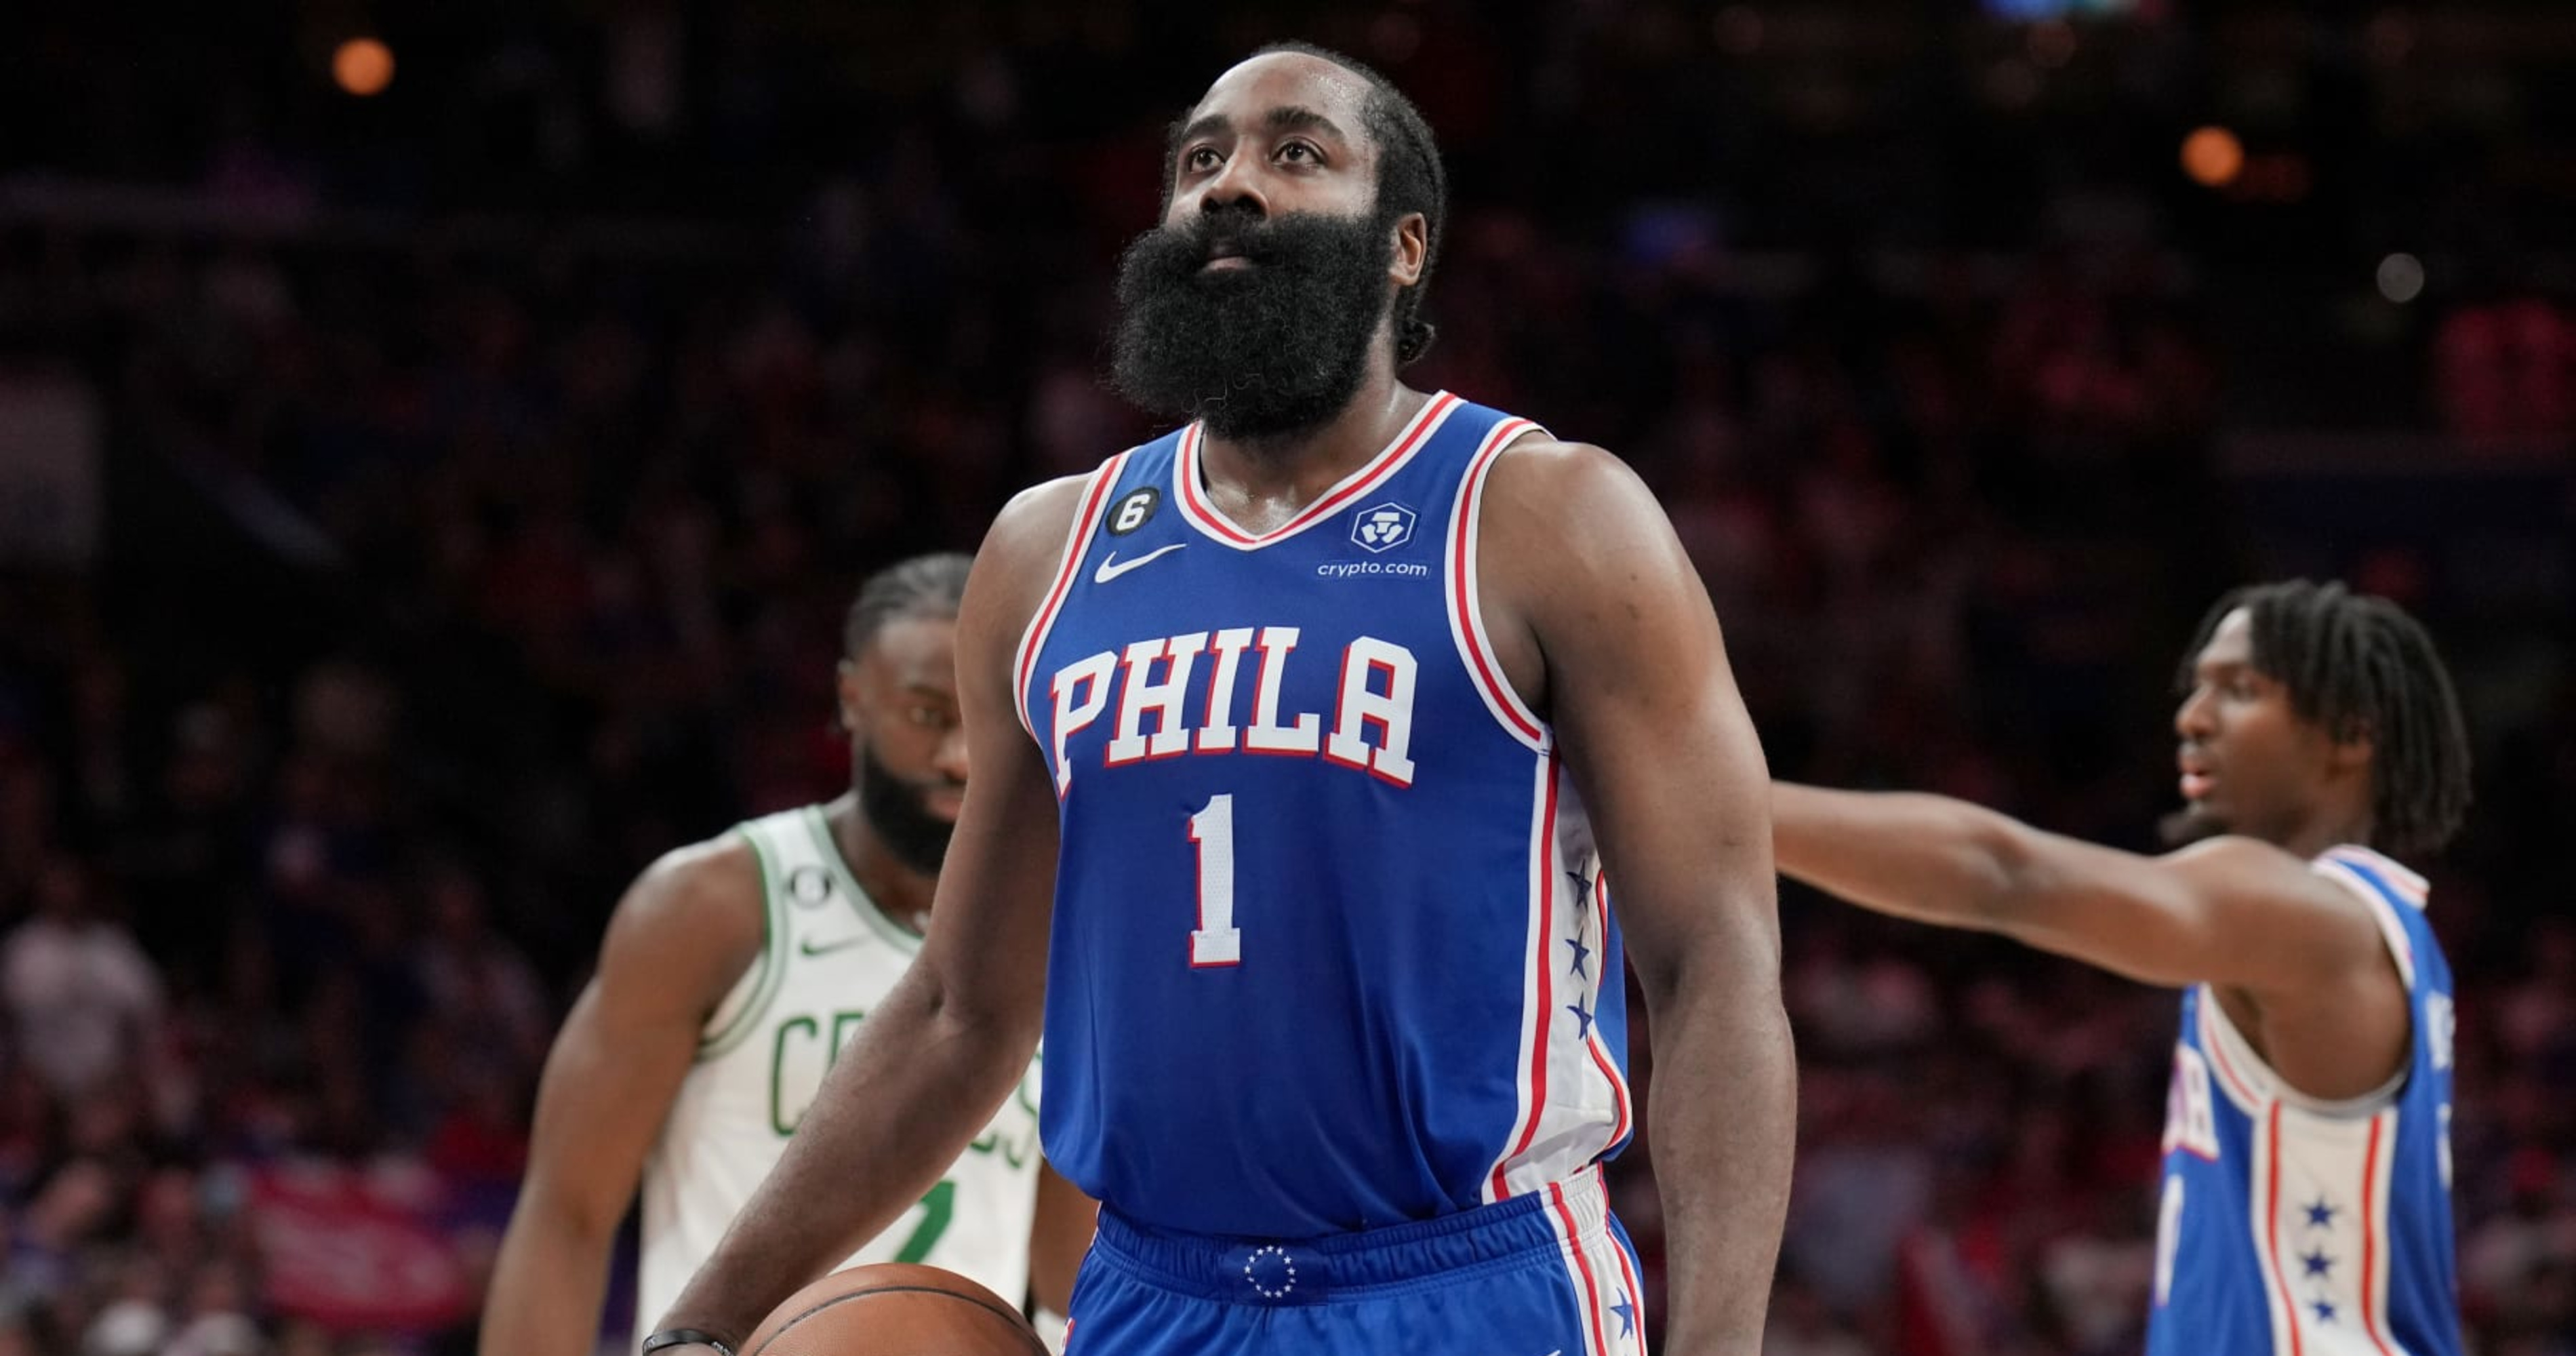 THE TEAM SHOULD BE FINED TOO - Andre Iguodala On The James Harden /  Philadelphia 76ers Situation 